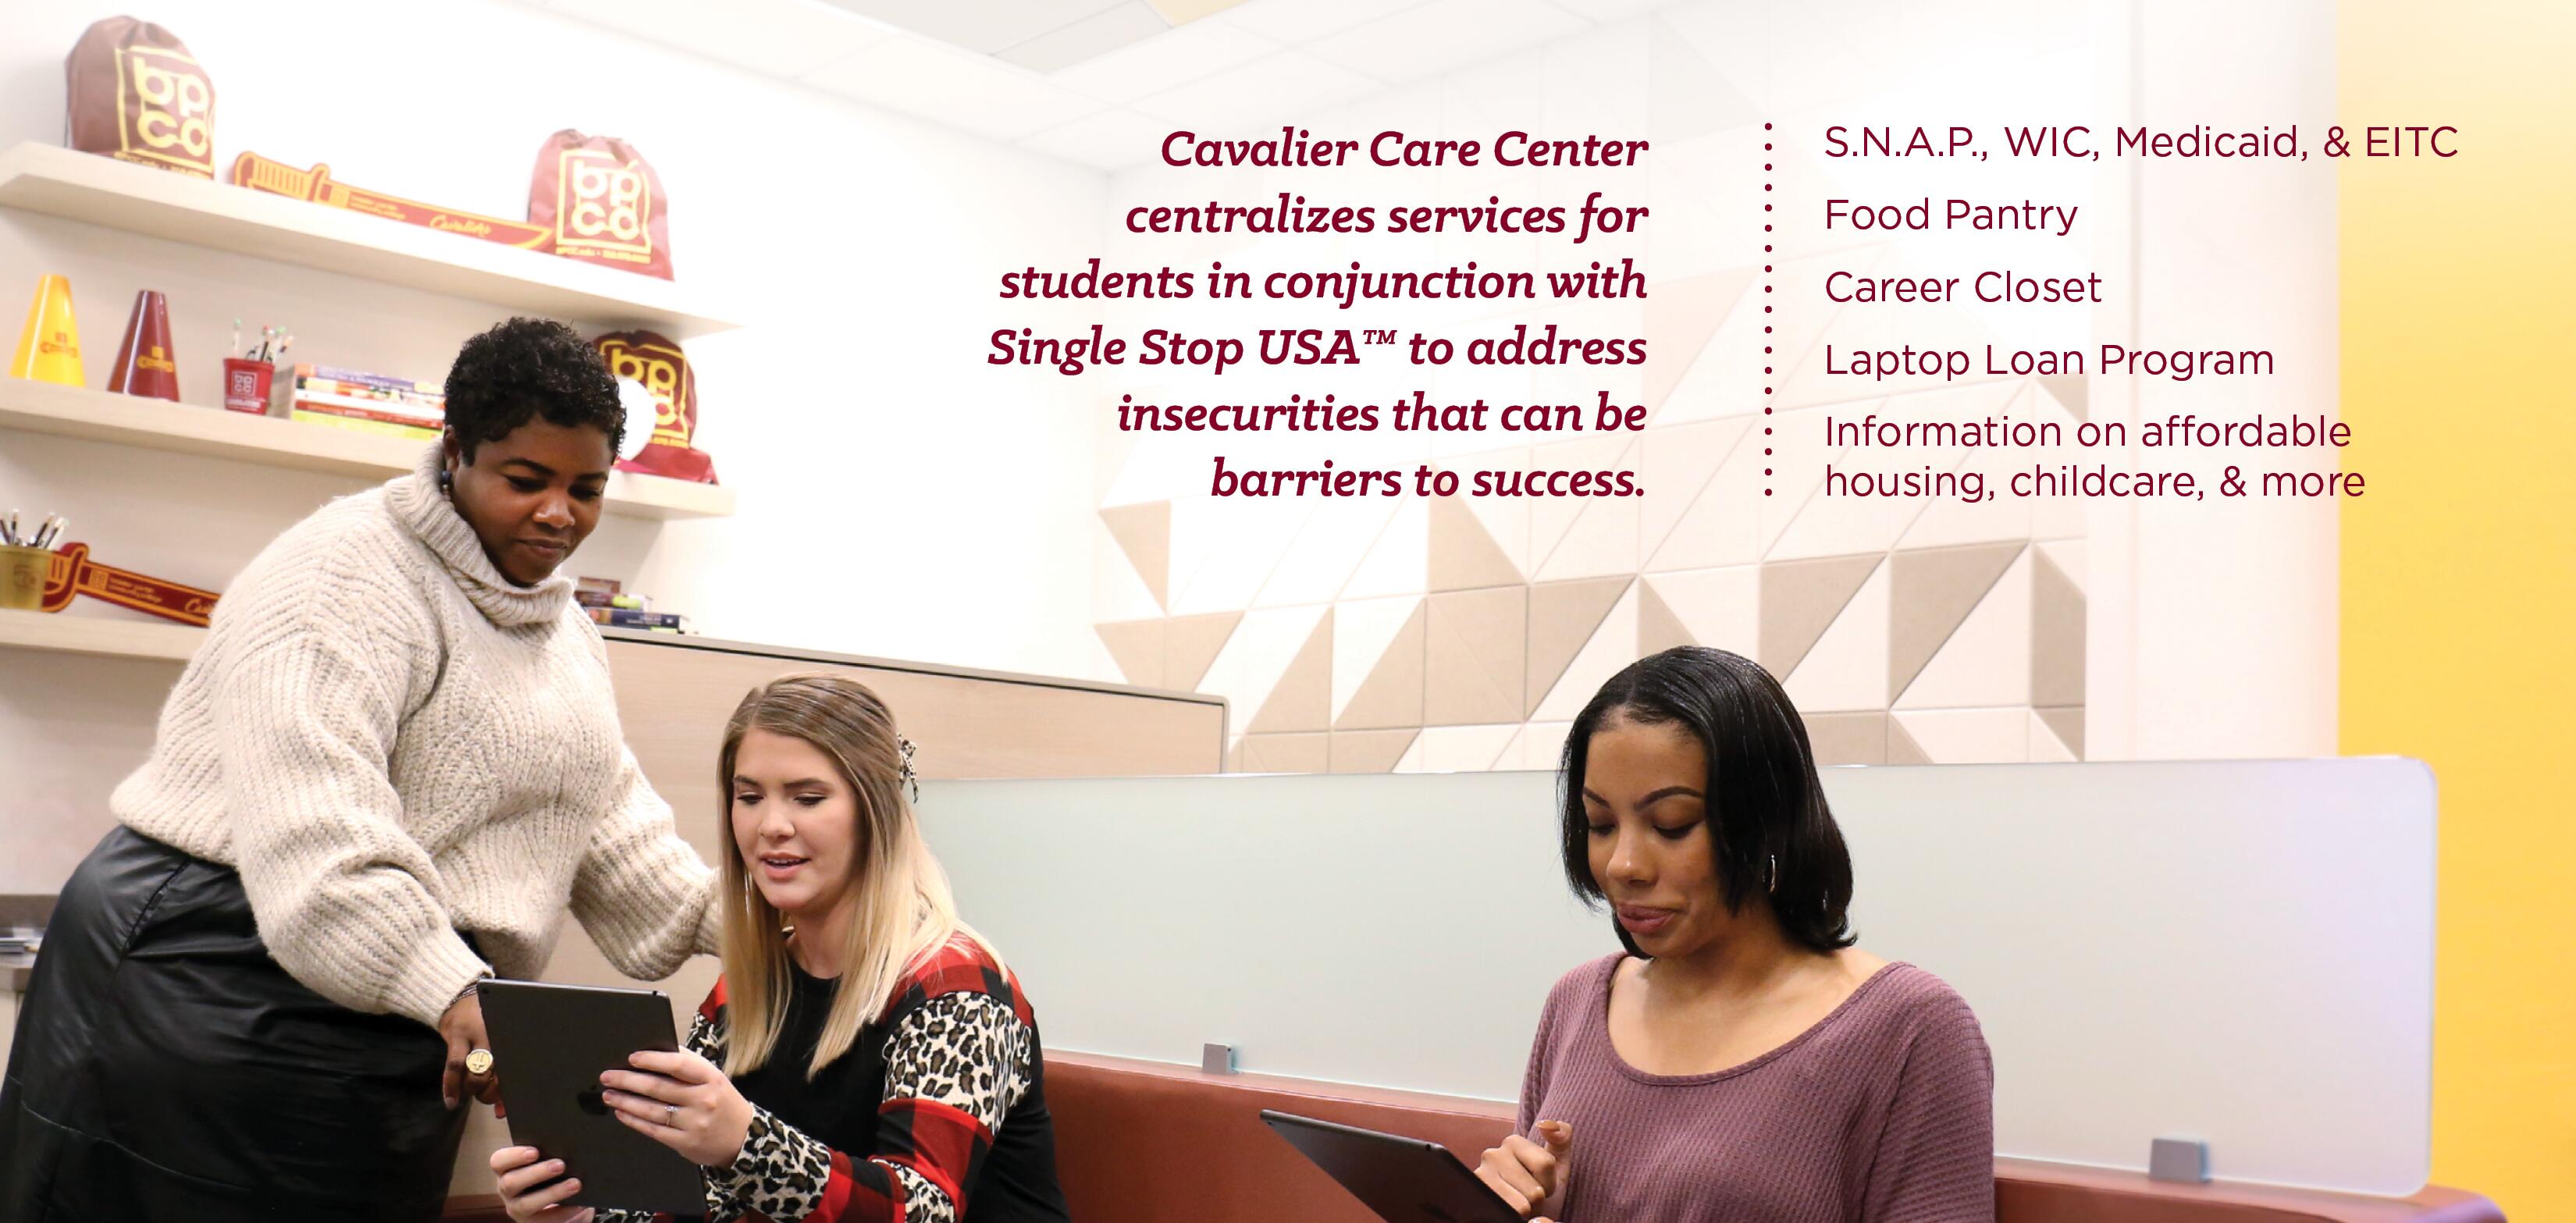 Cavalier Care Center centralizes services for students